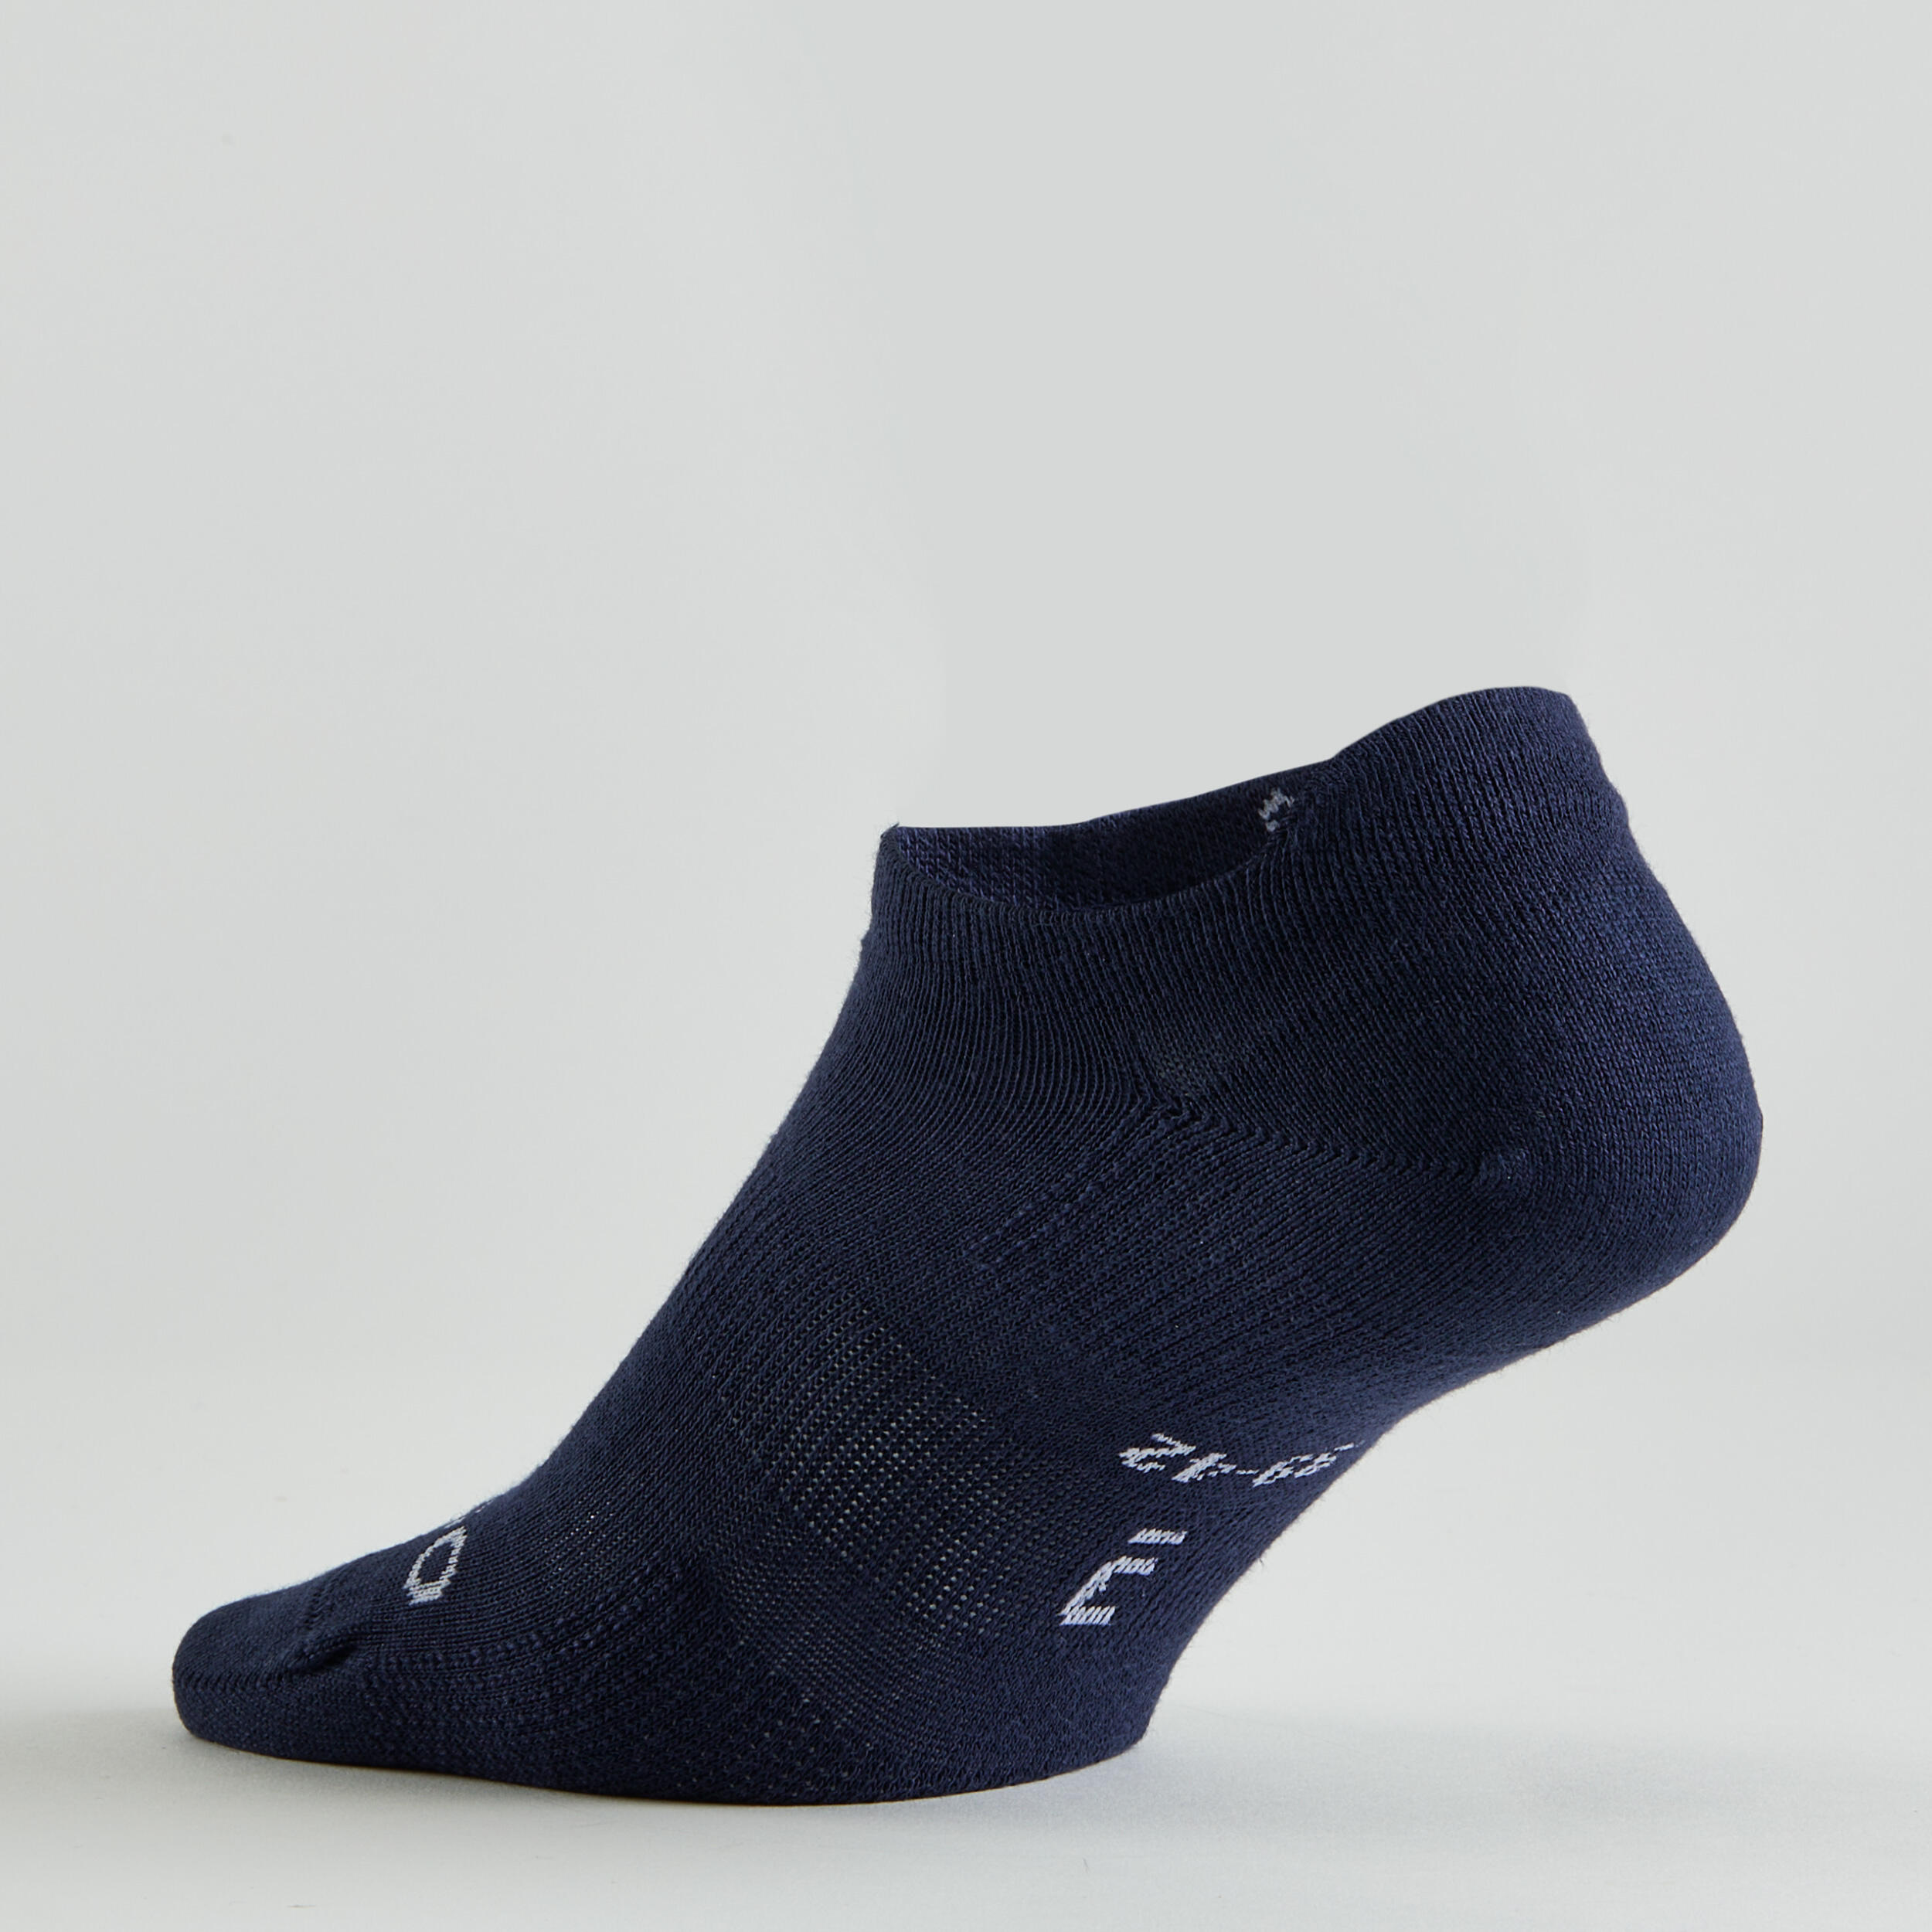 Low Sports Socks RS 160 Tri-Pack - Apricot/Pink/Navy 10/14